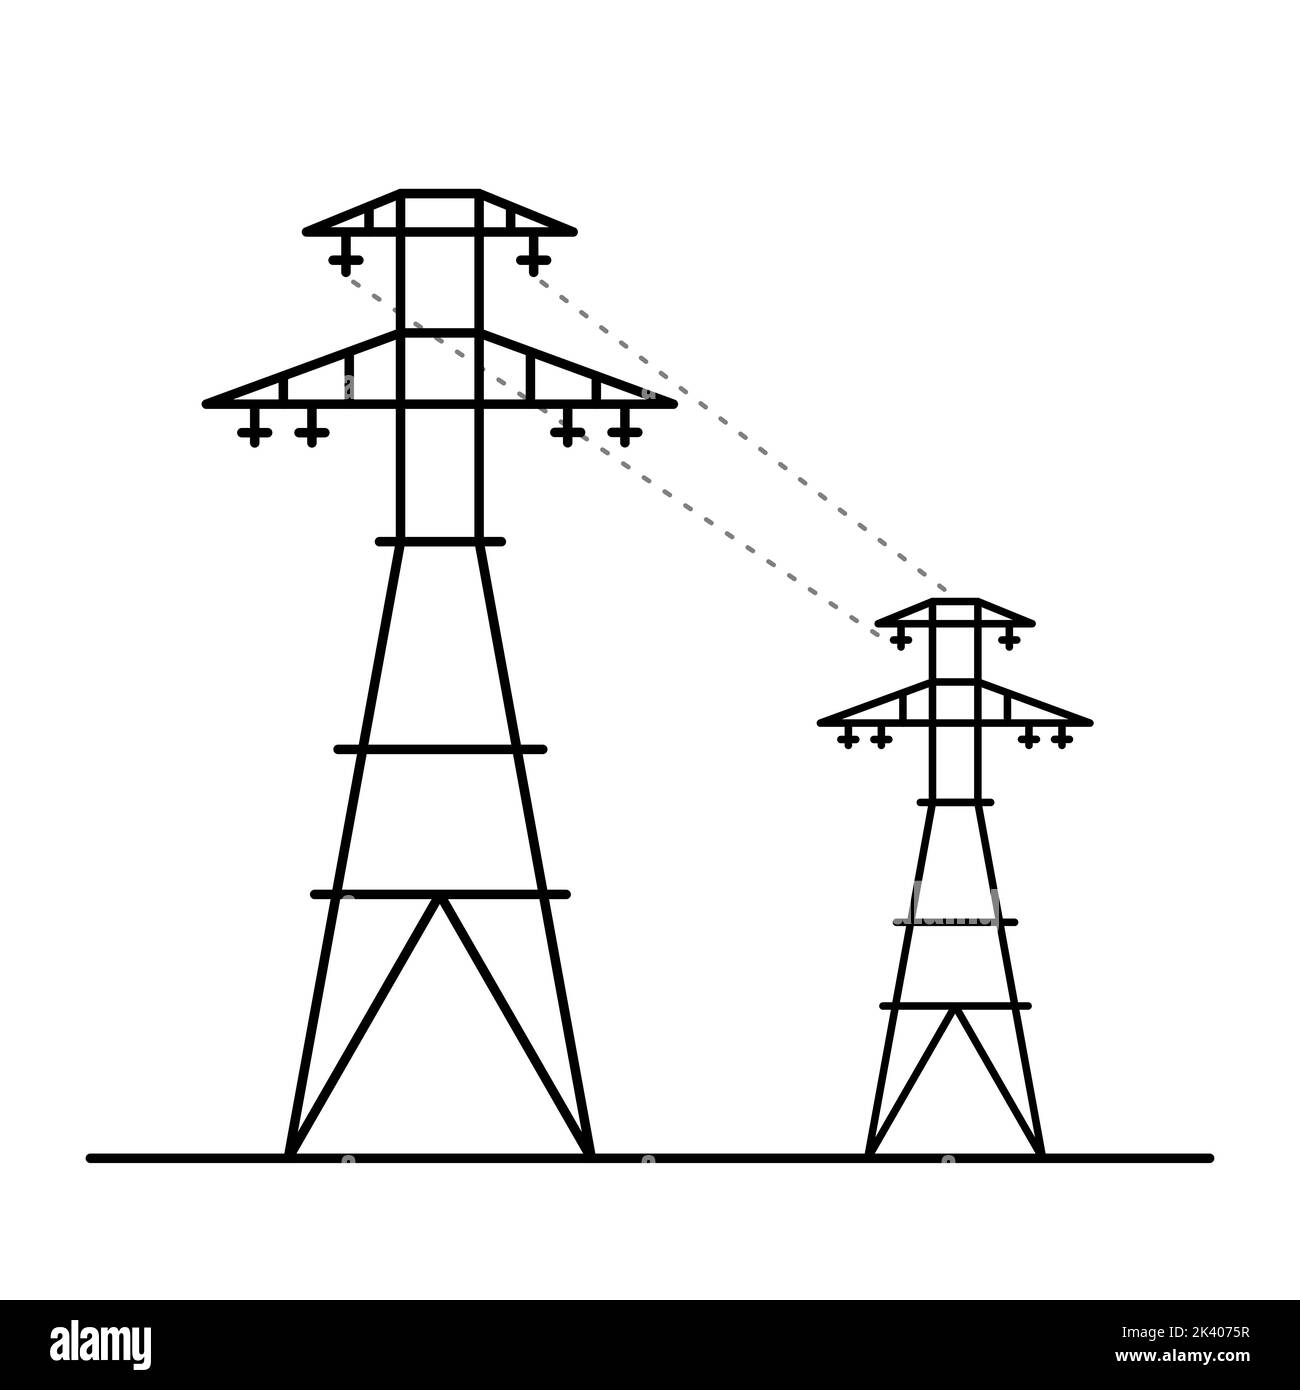 Power tower line art. Two high voltage poles. Stock Vector